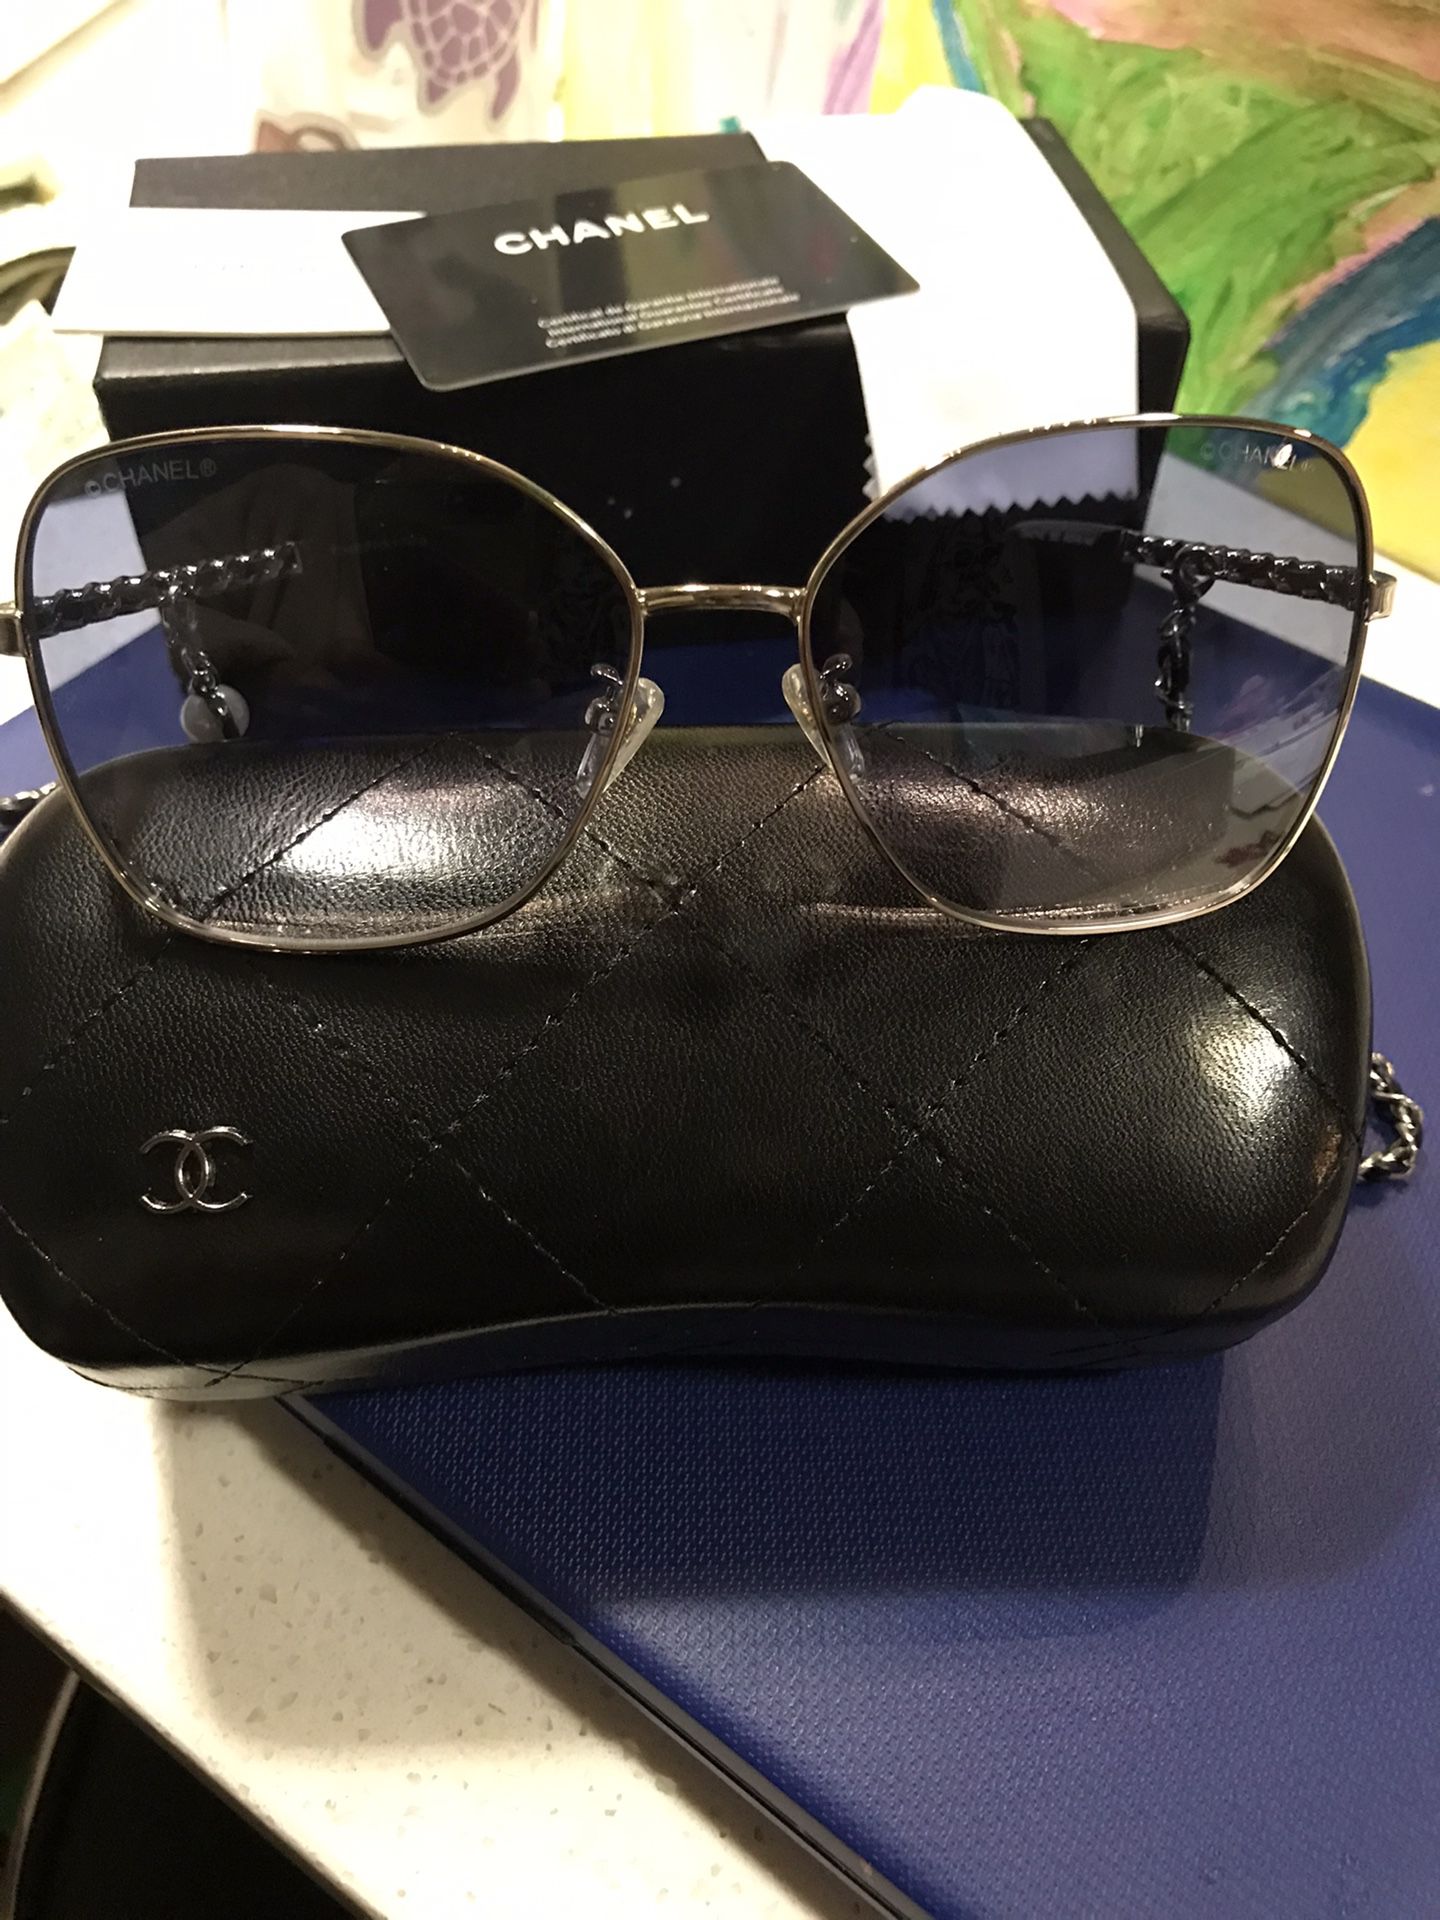 Chanel Sunglasses for Sale in Frisco, TX - OfferUp